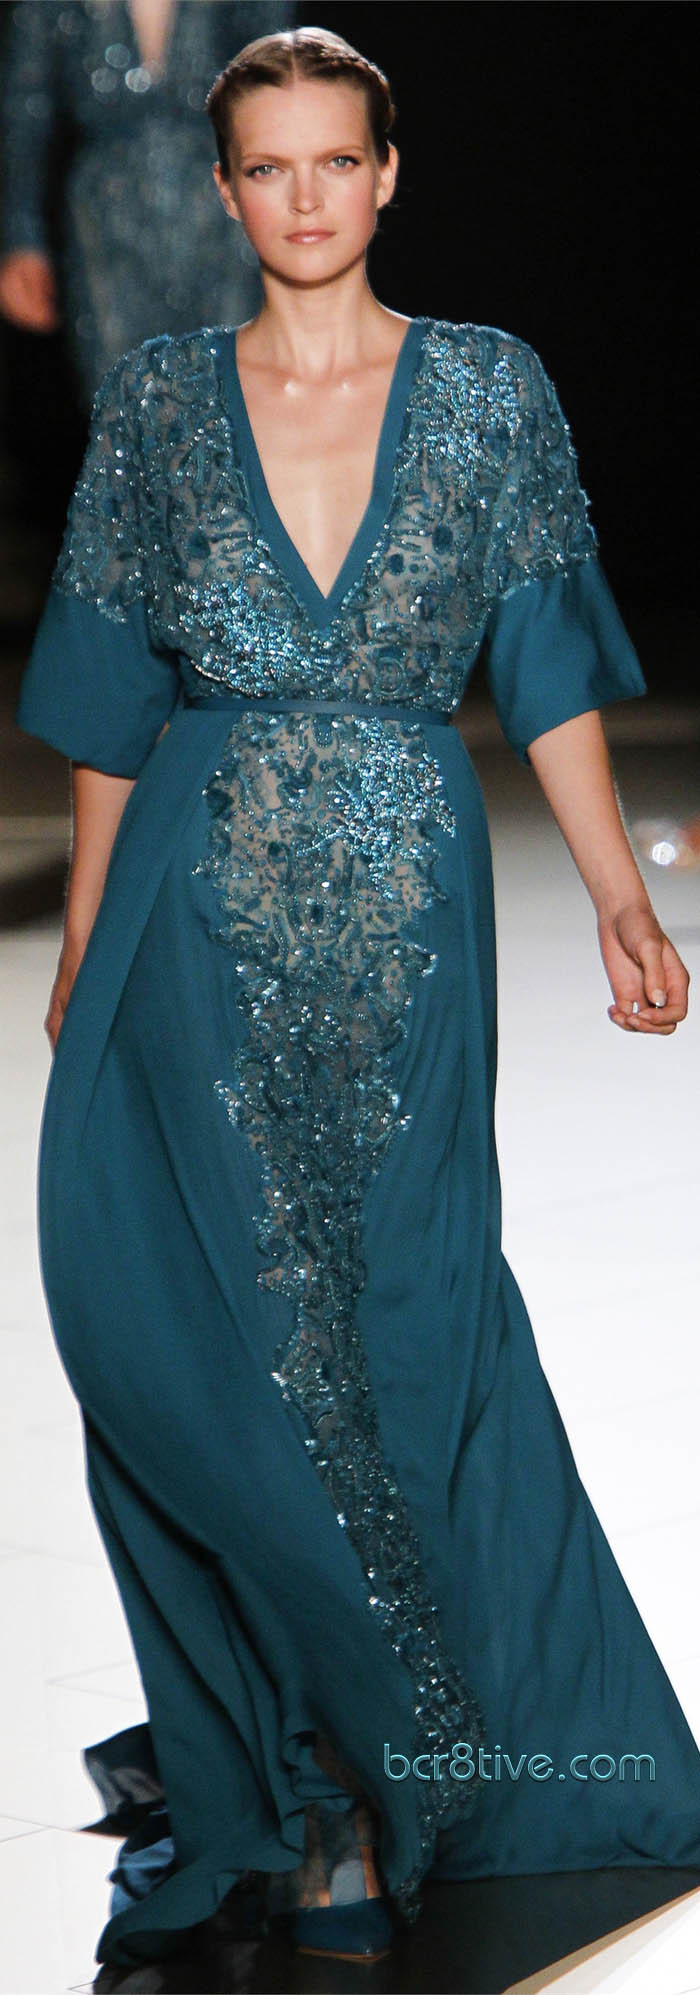 Elie Saab Fall Winter 2012 Couture – Be Creative